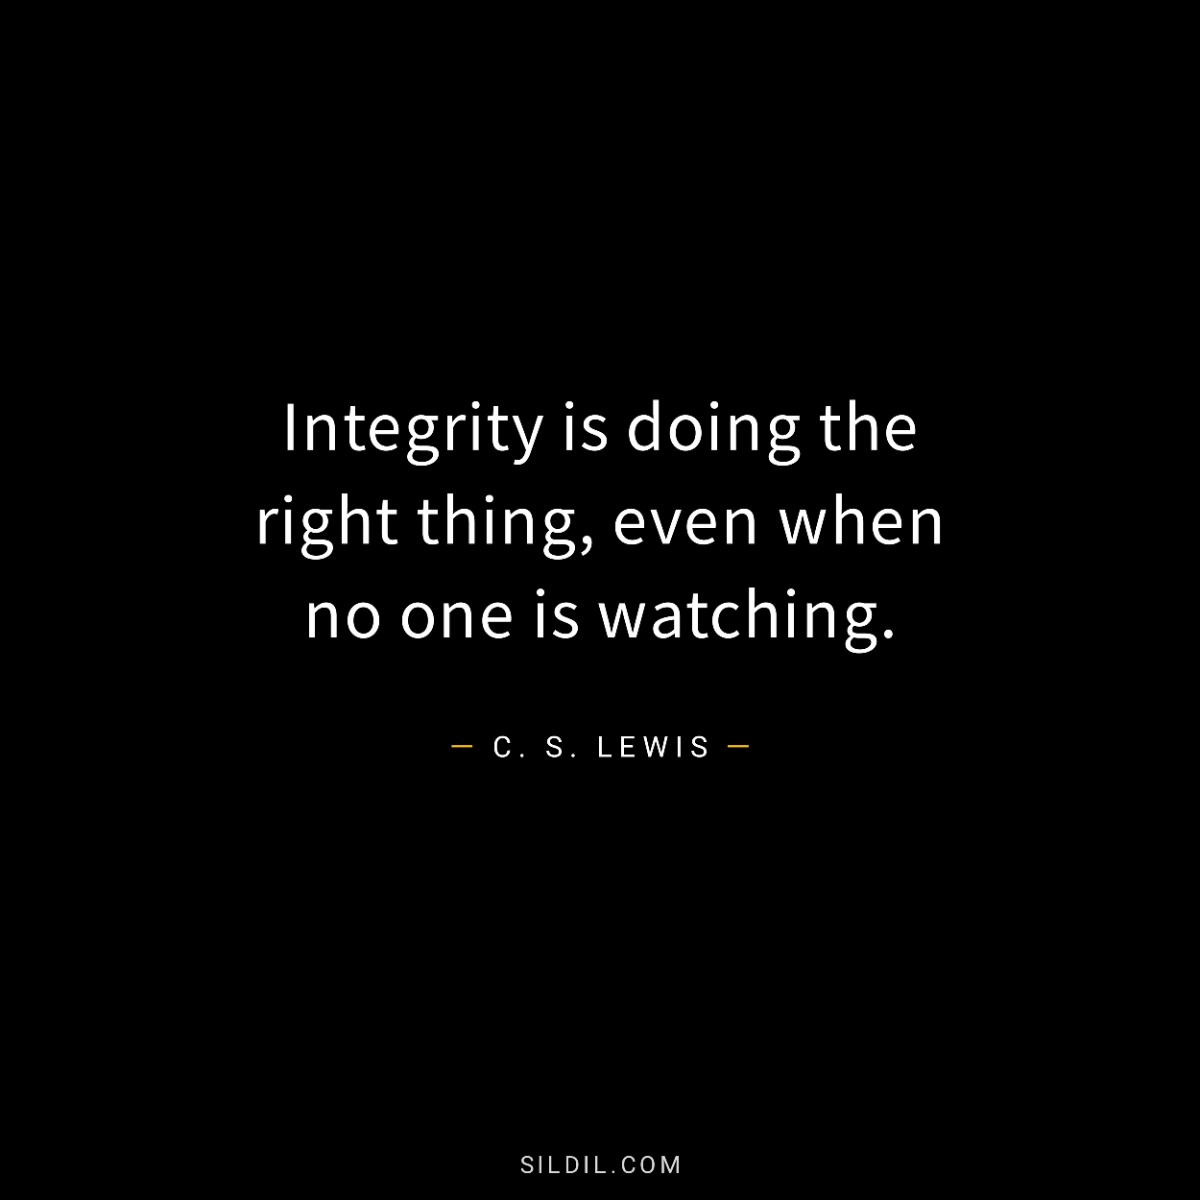 Integrity is doing the right thing, even when no one is watching.